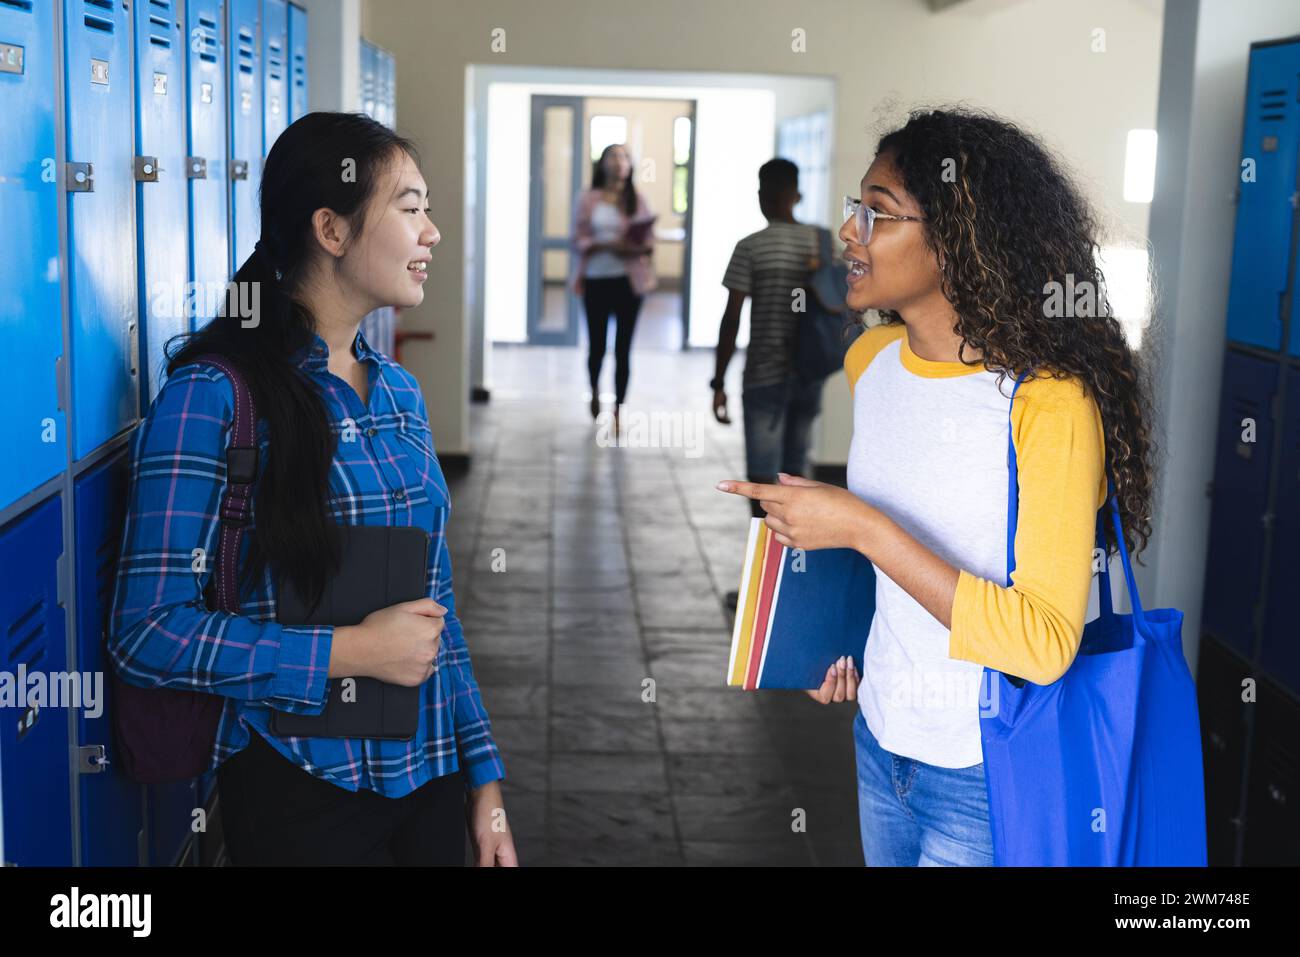 Teenage Asian girl chats with a biracial woman at high school Stock Photo